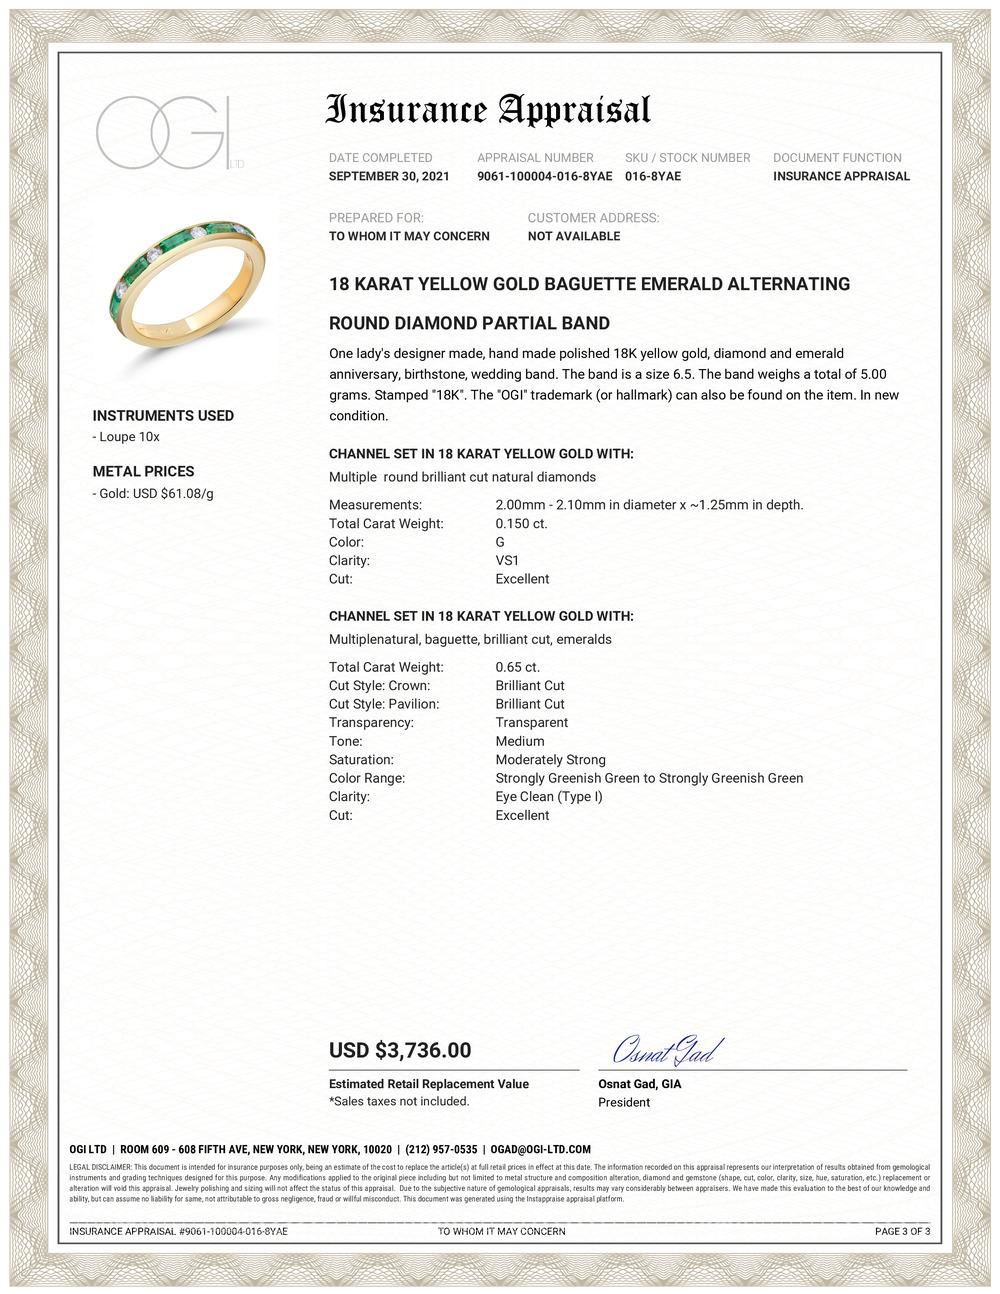 18 Karats yellow gold baguette-shaped emerald alternating with round-shaped diamond 
The ring is a 3-millimeter channel set, partial wedding or anniversary ring 
Baguette emerald weighing 0.65 carats
Round diamond weighing 0.15
Diamond quality G